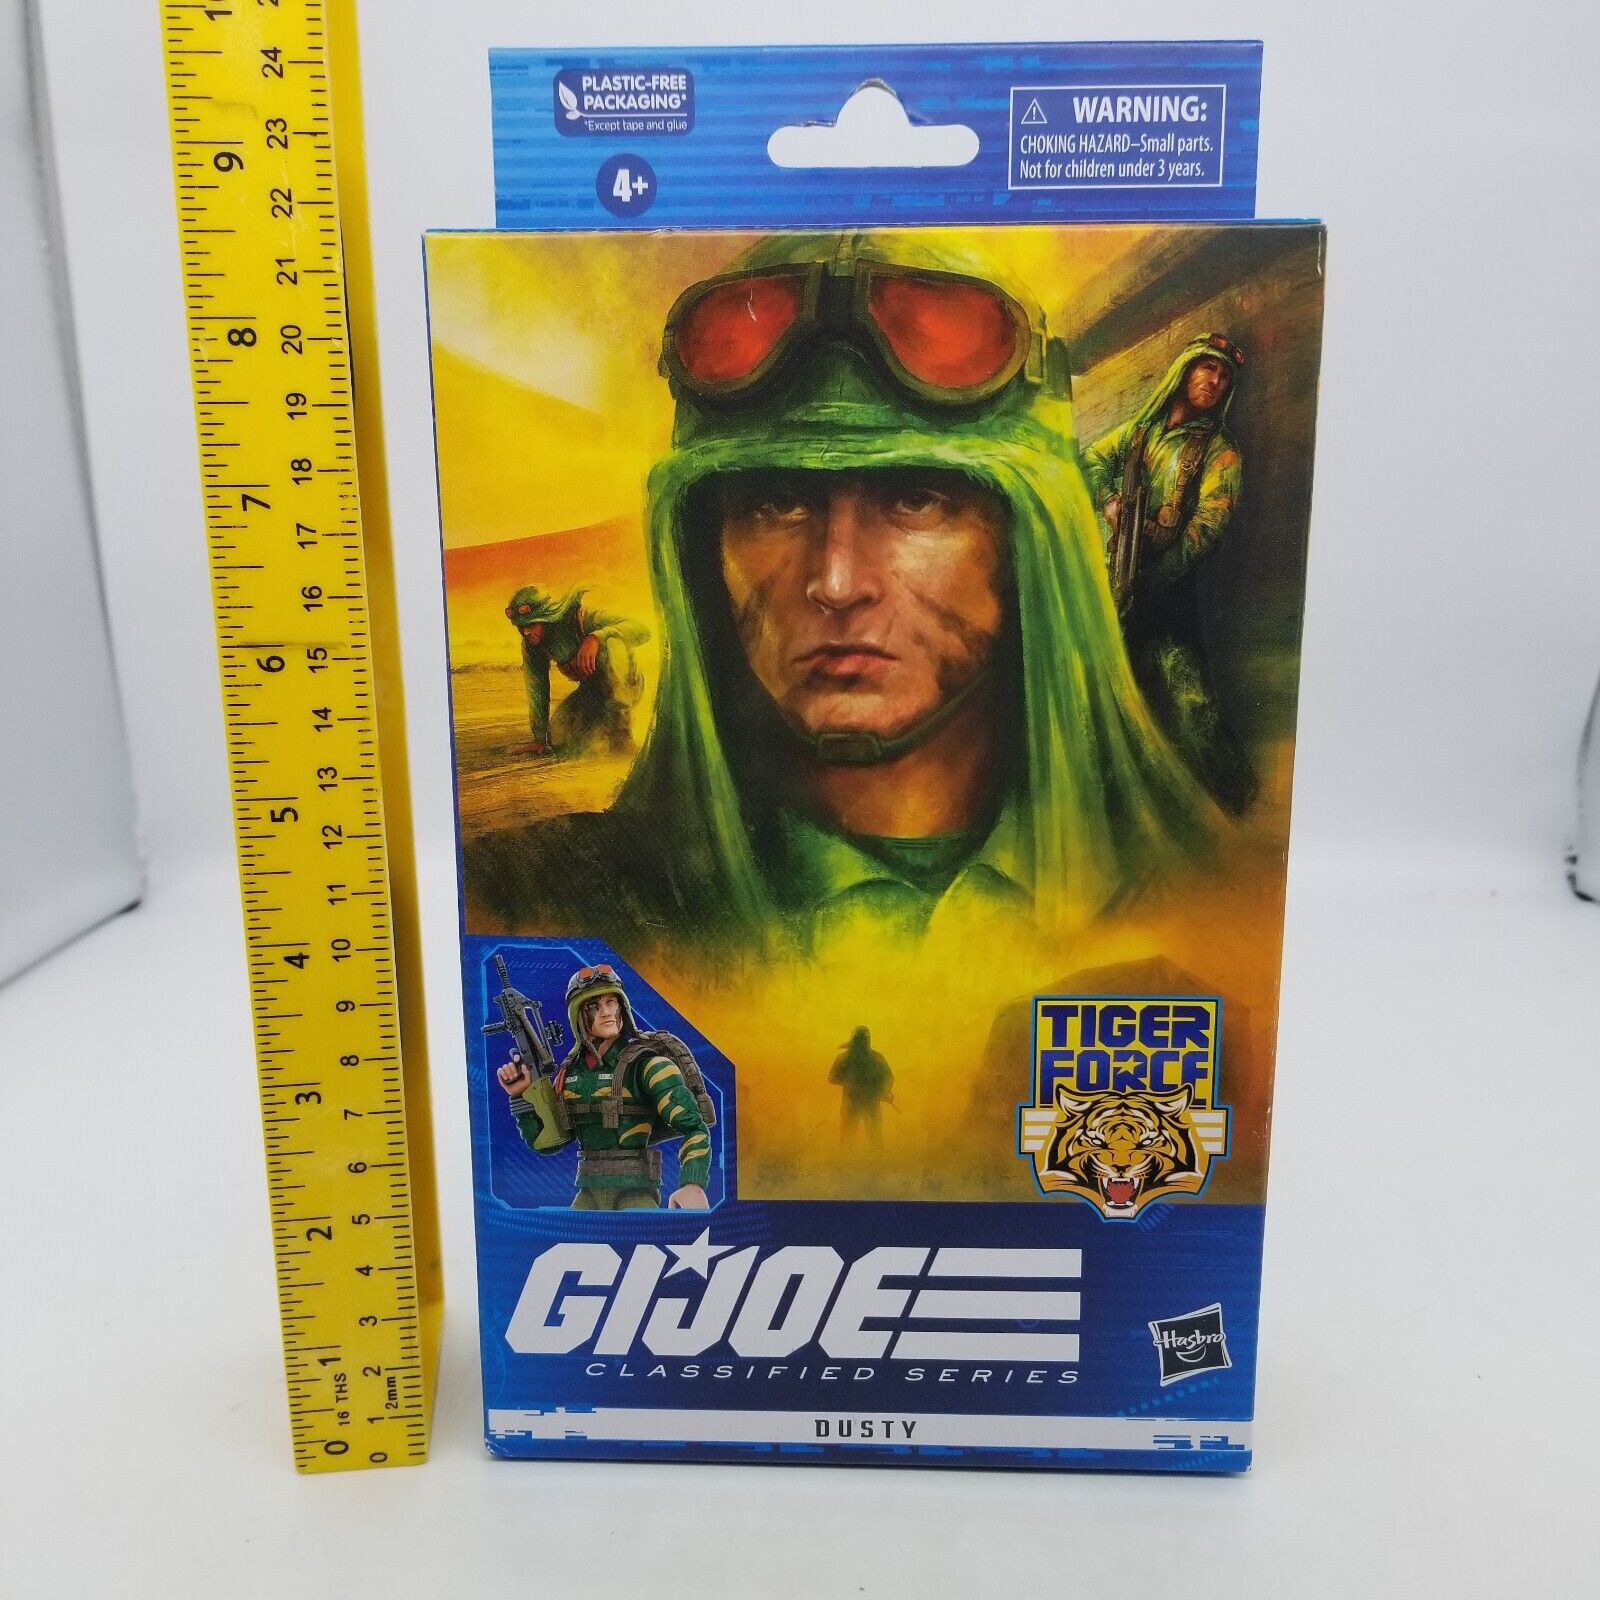 G.I. Joe Classified Series Tiger Force Dusty Action Figure Target Exclusive Hasb